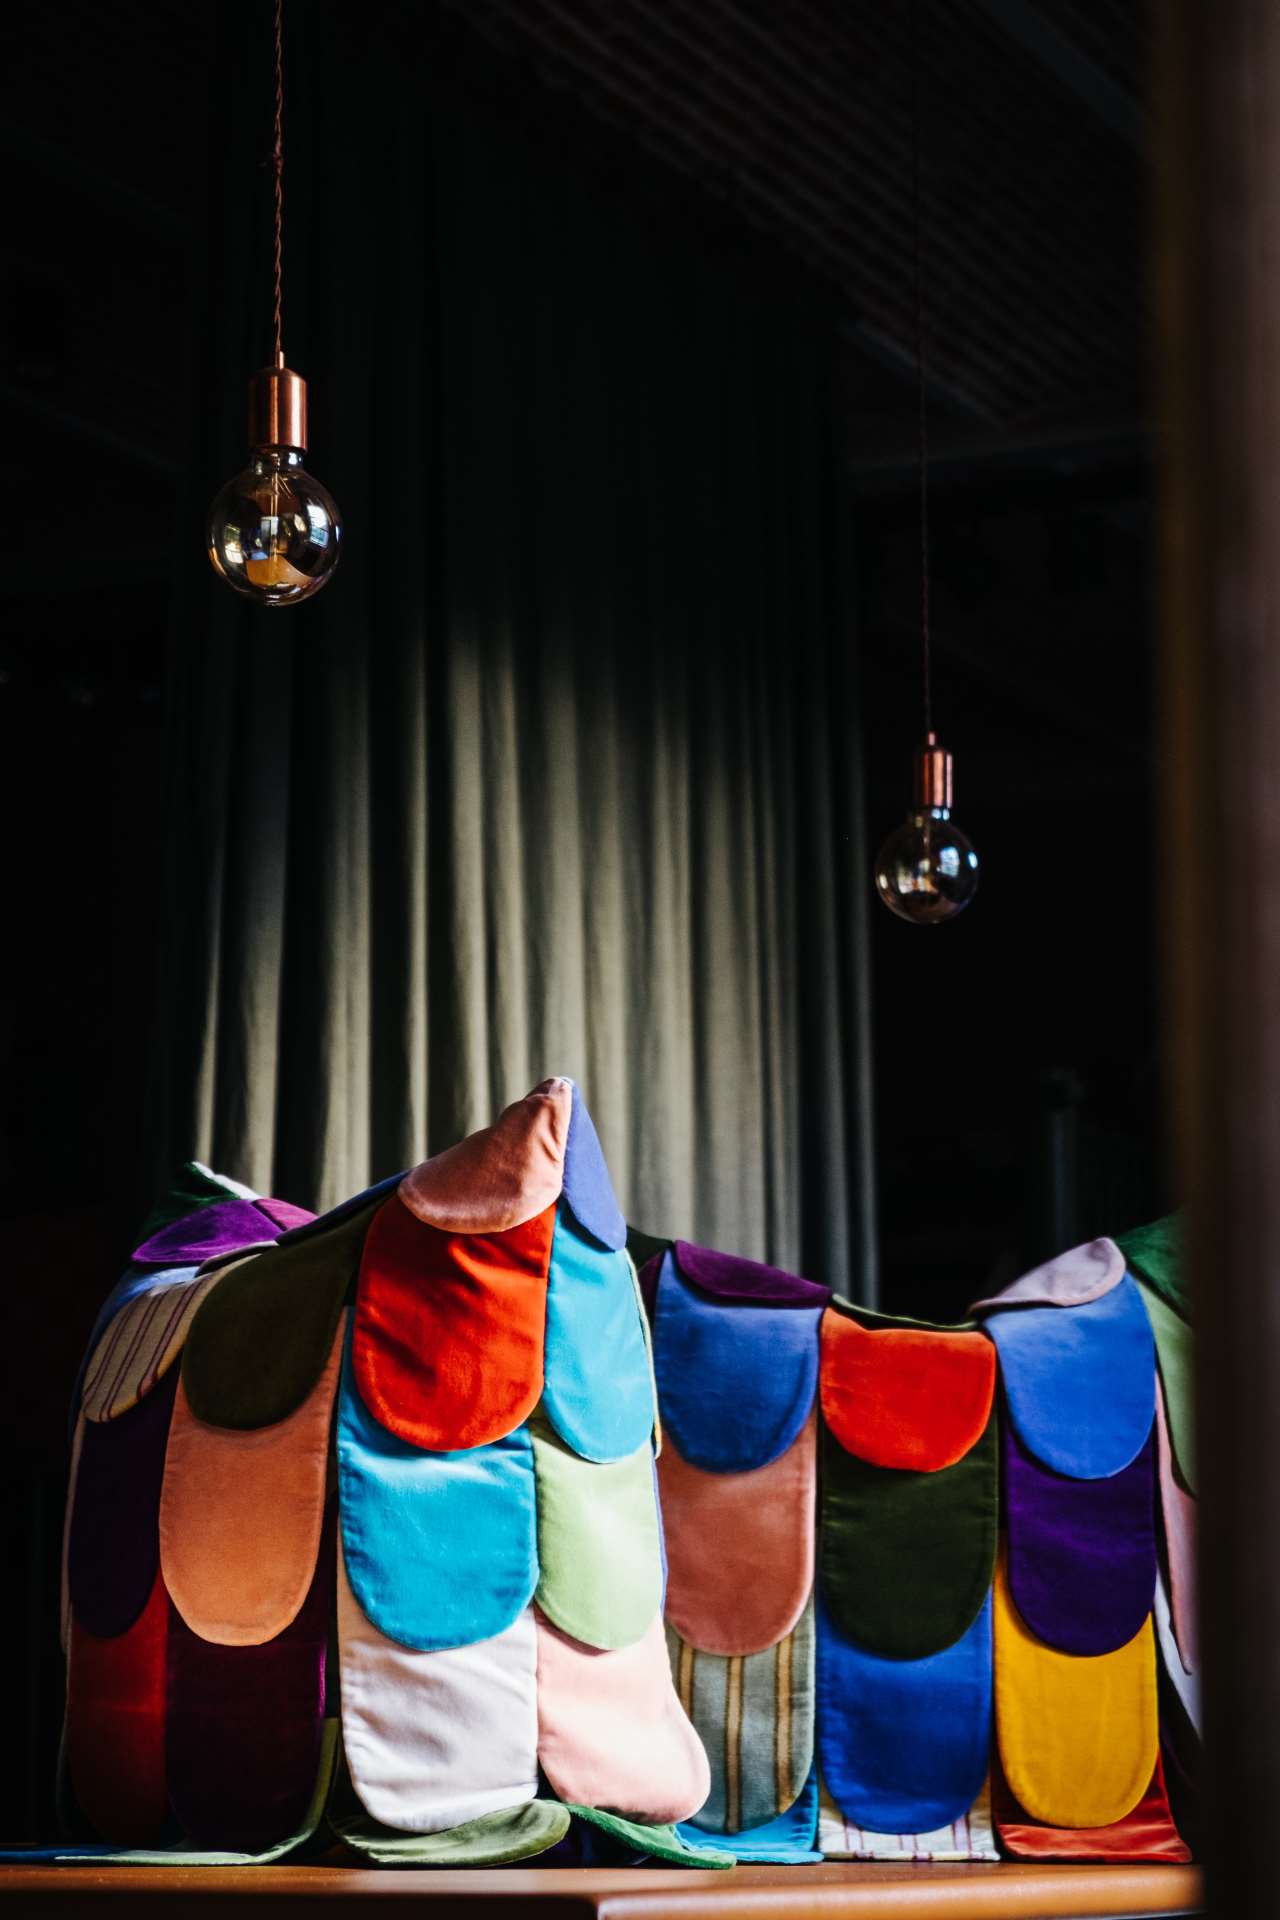 JPDEMEYER&amp;CO's latest cushion &amp; fabric collections presented at Palazzo Clerici during Milan Design Week 2019. © JPDEMEYER&amp;CO. 